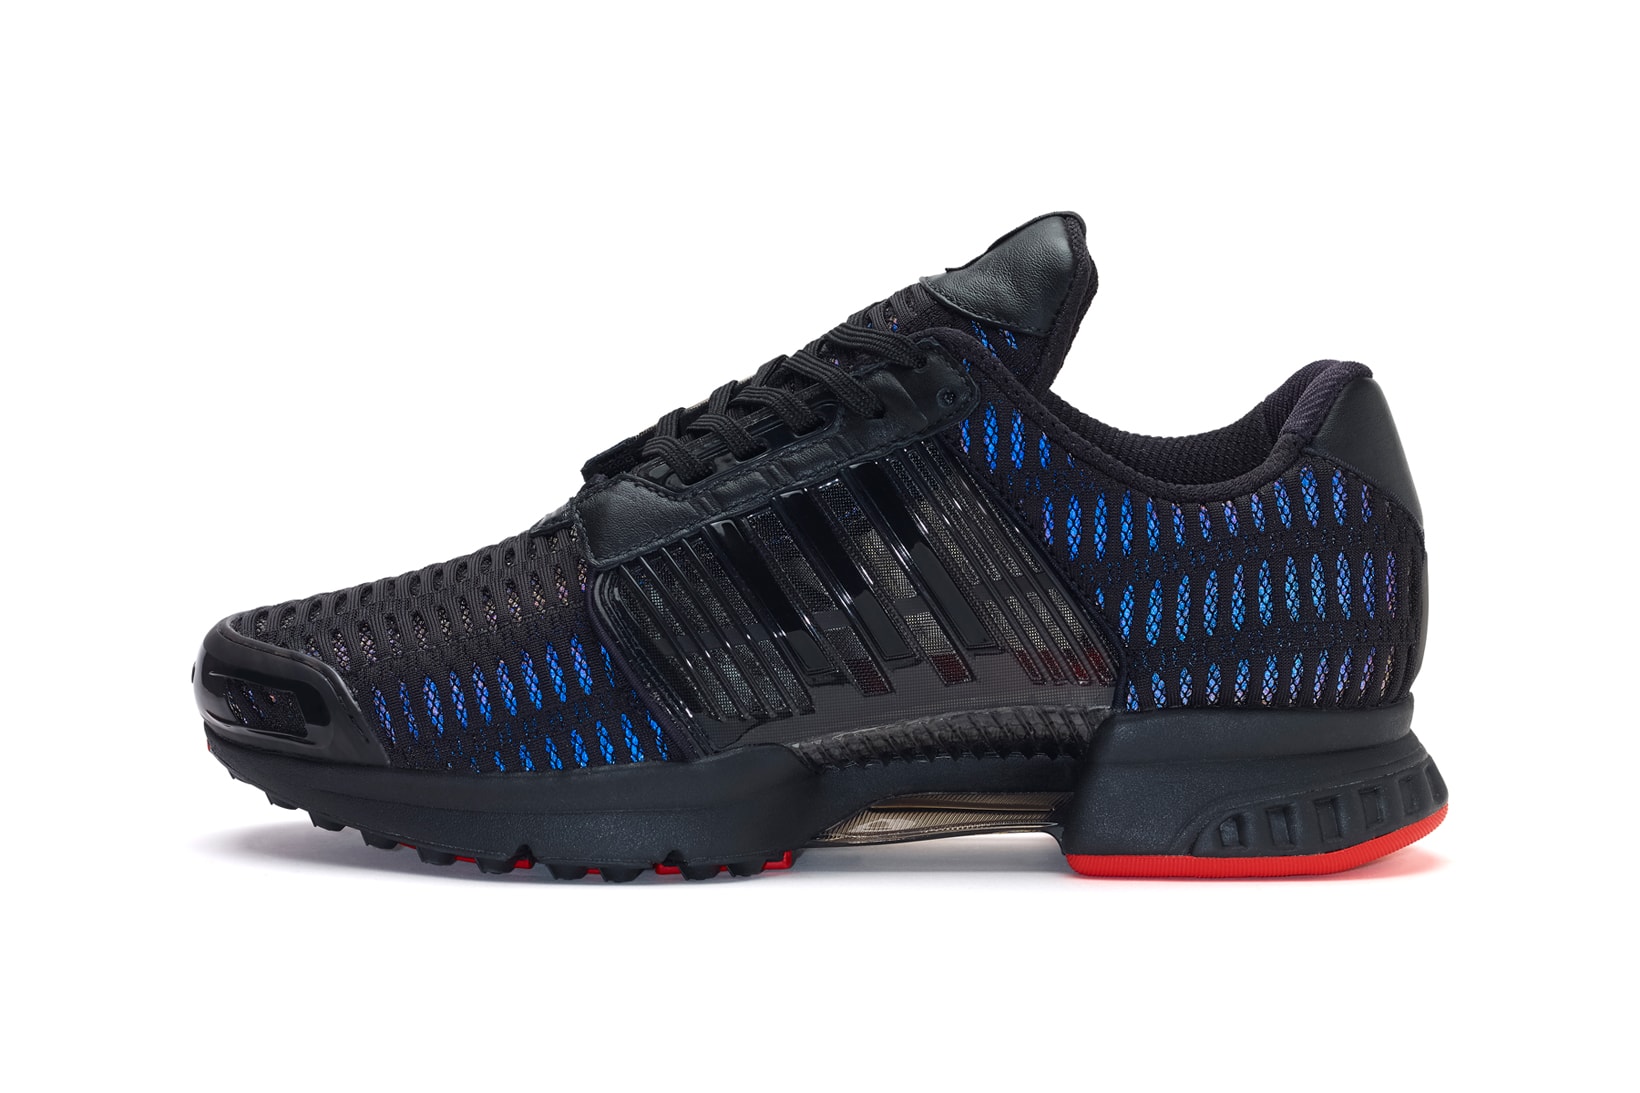 Another Look At The Black Coca Cola x adidas ClimaCool 1